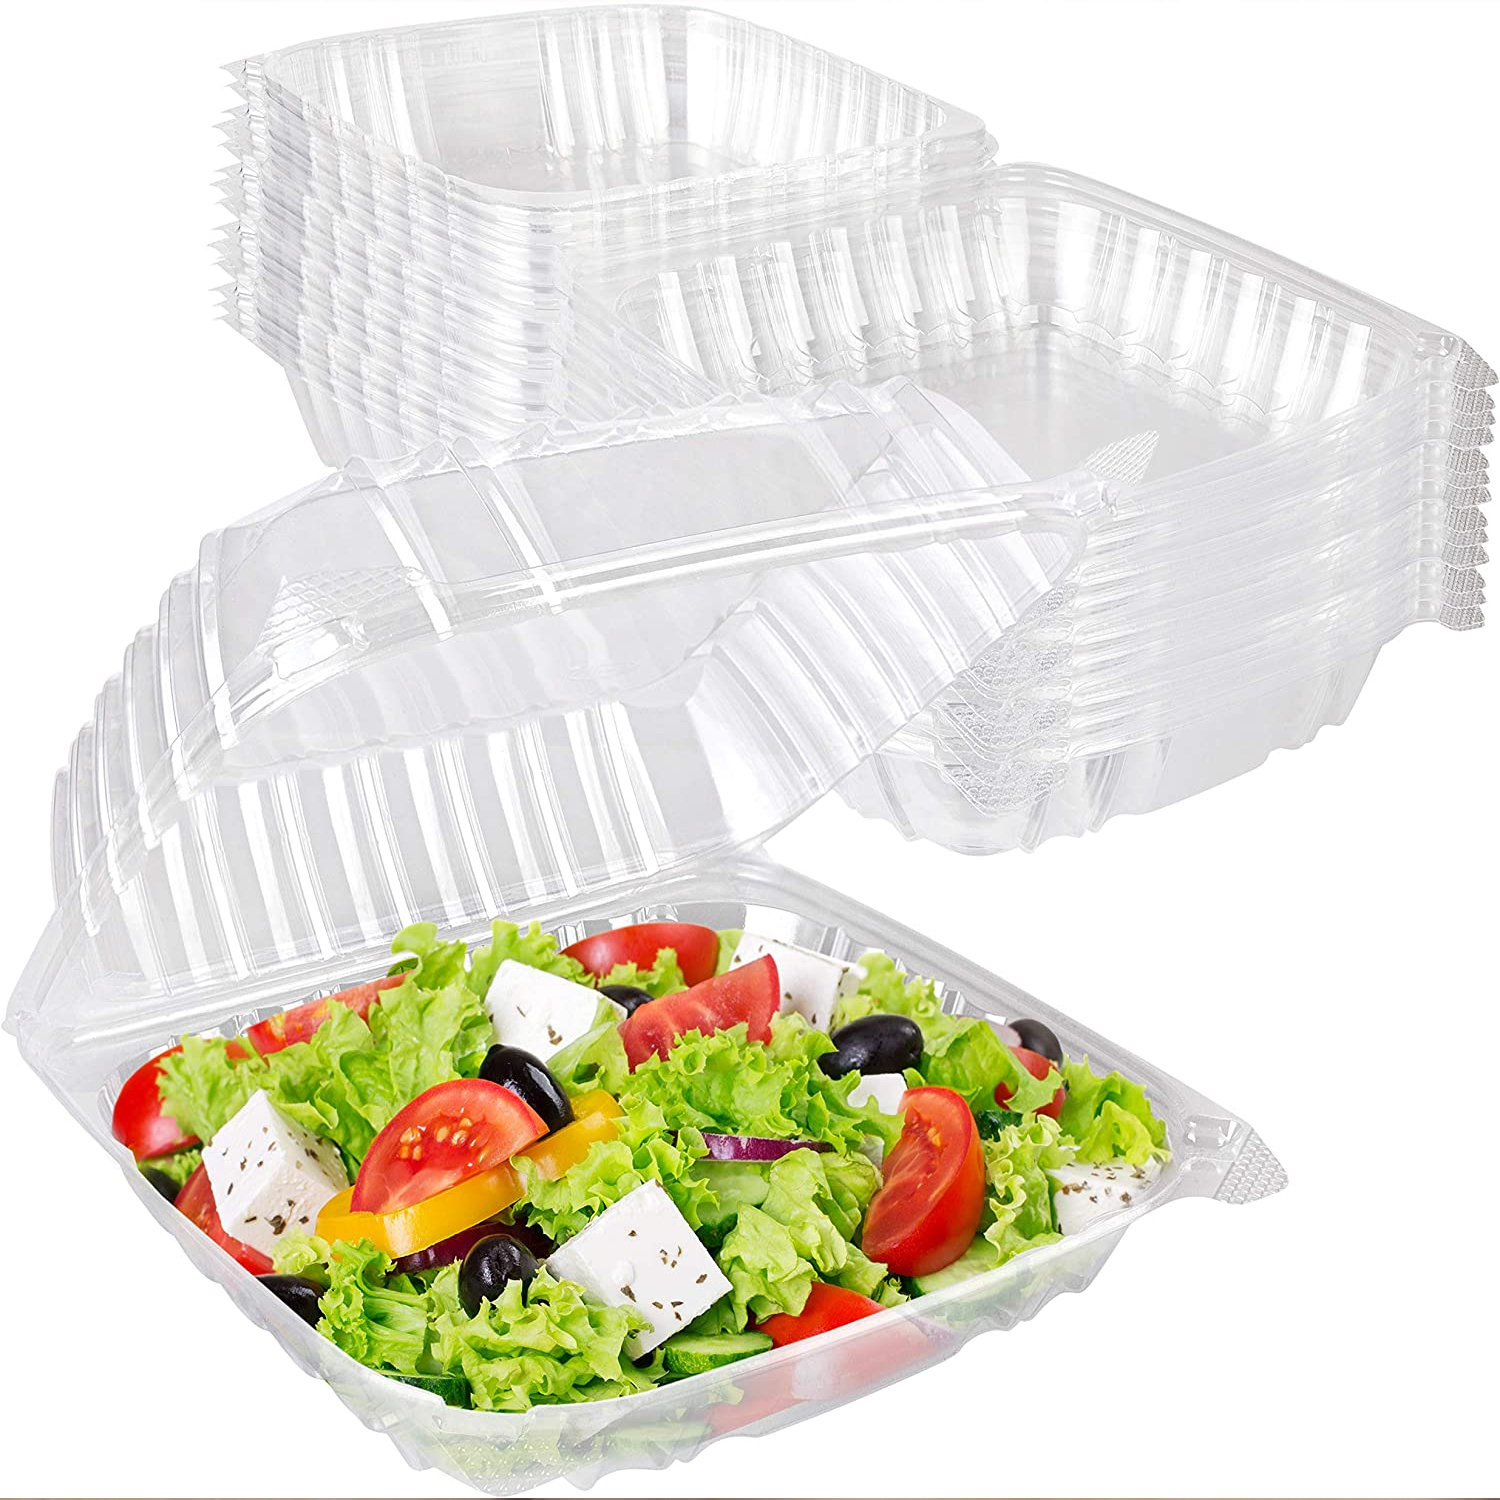 8-3/4 x 6 x 1-4/5 – 32 OZ - Rectangular Plastic Food Takeout Containers 